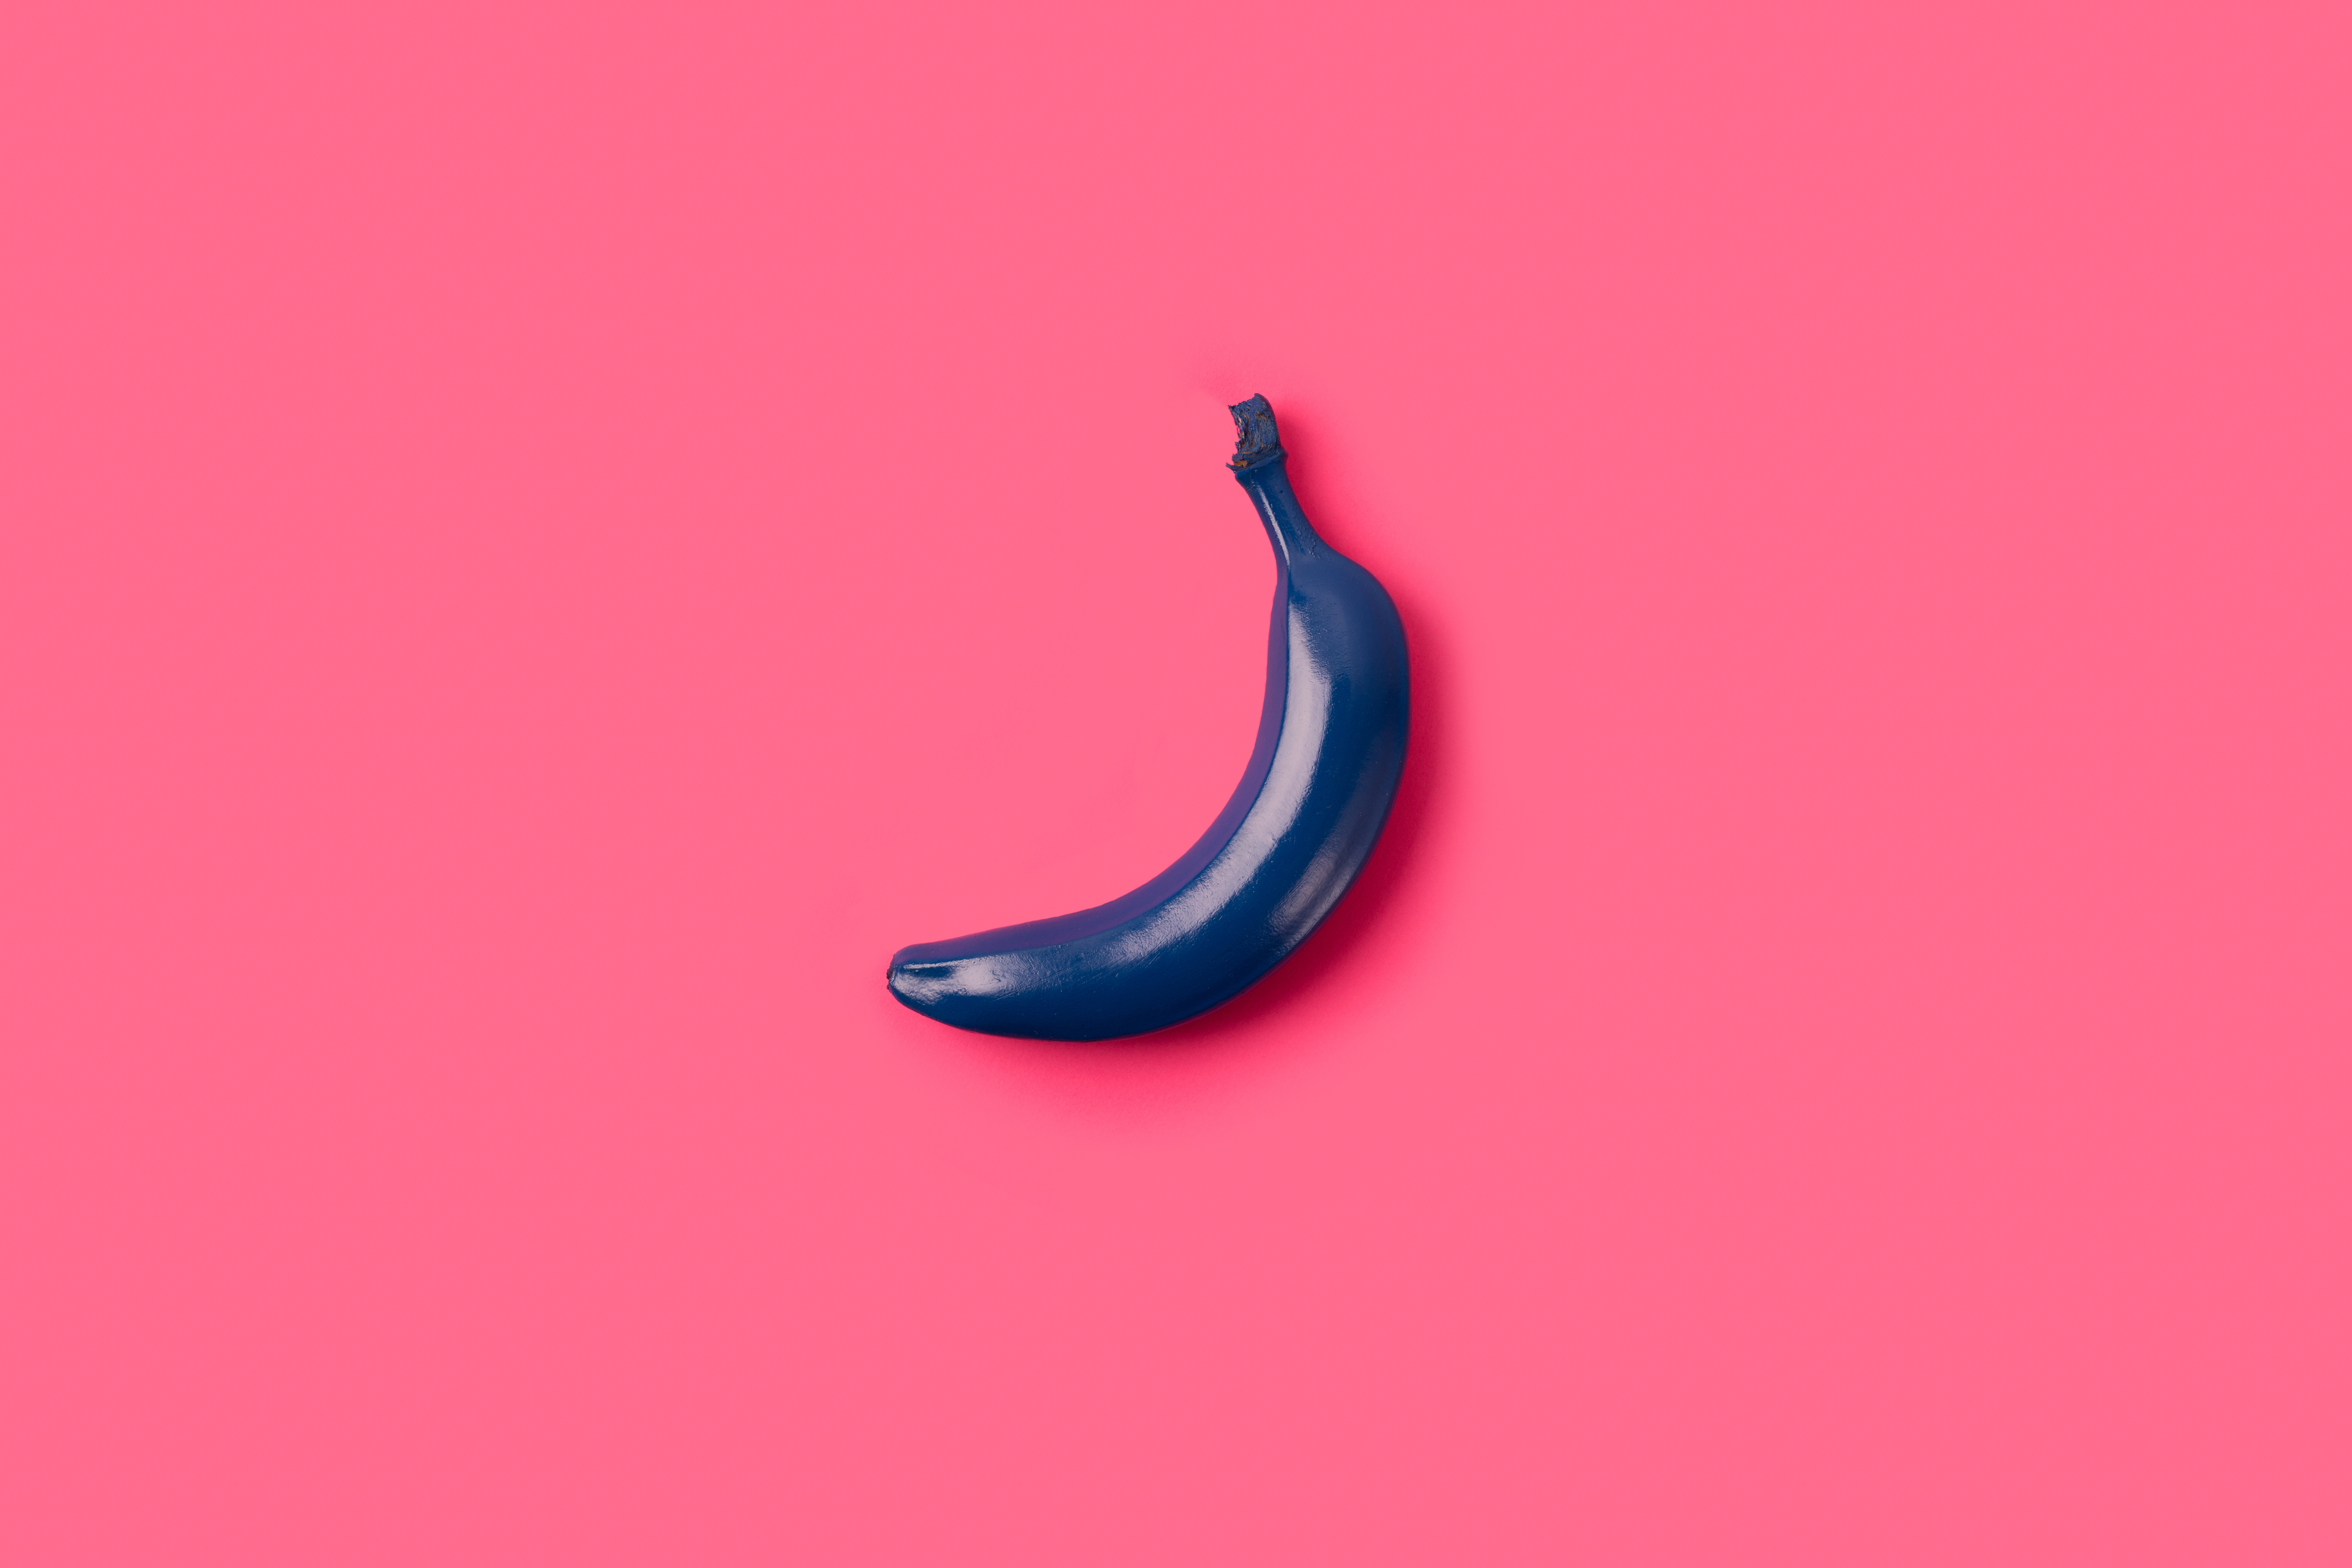 Blue banana over a pink background. Top view, minimal concept.